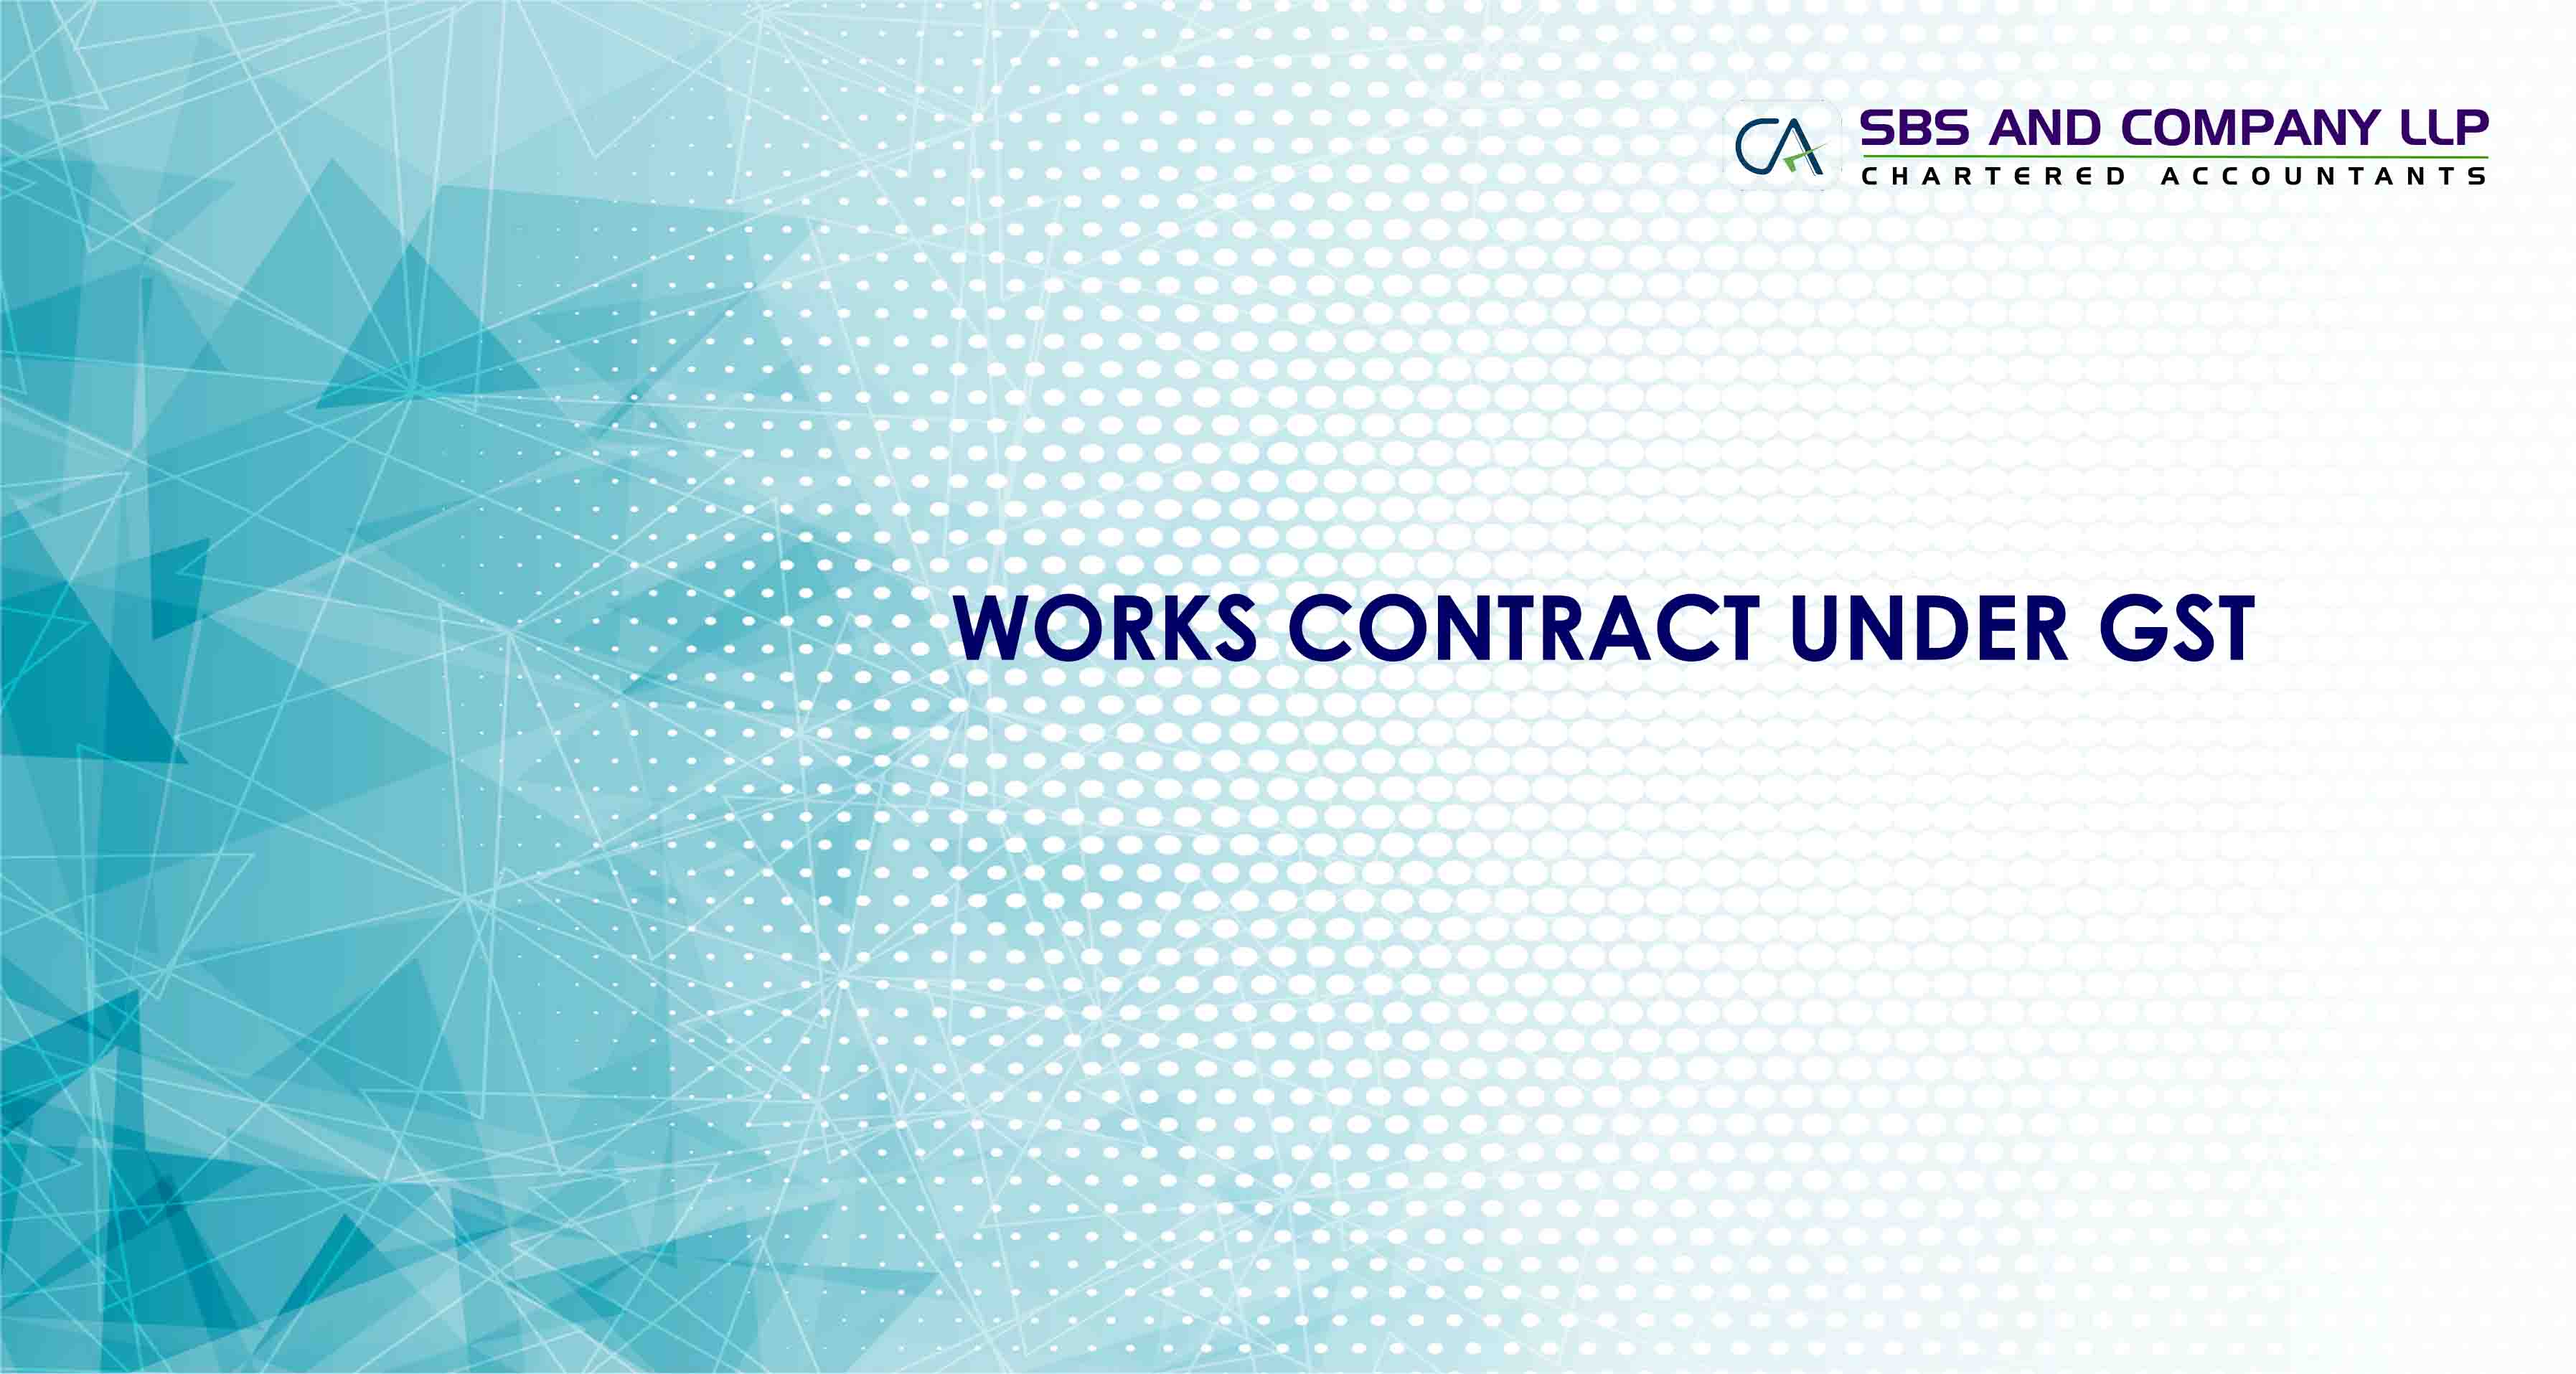 WORKS CONTRACT UNDER GST